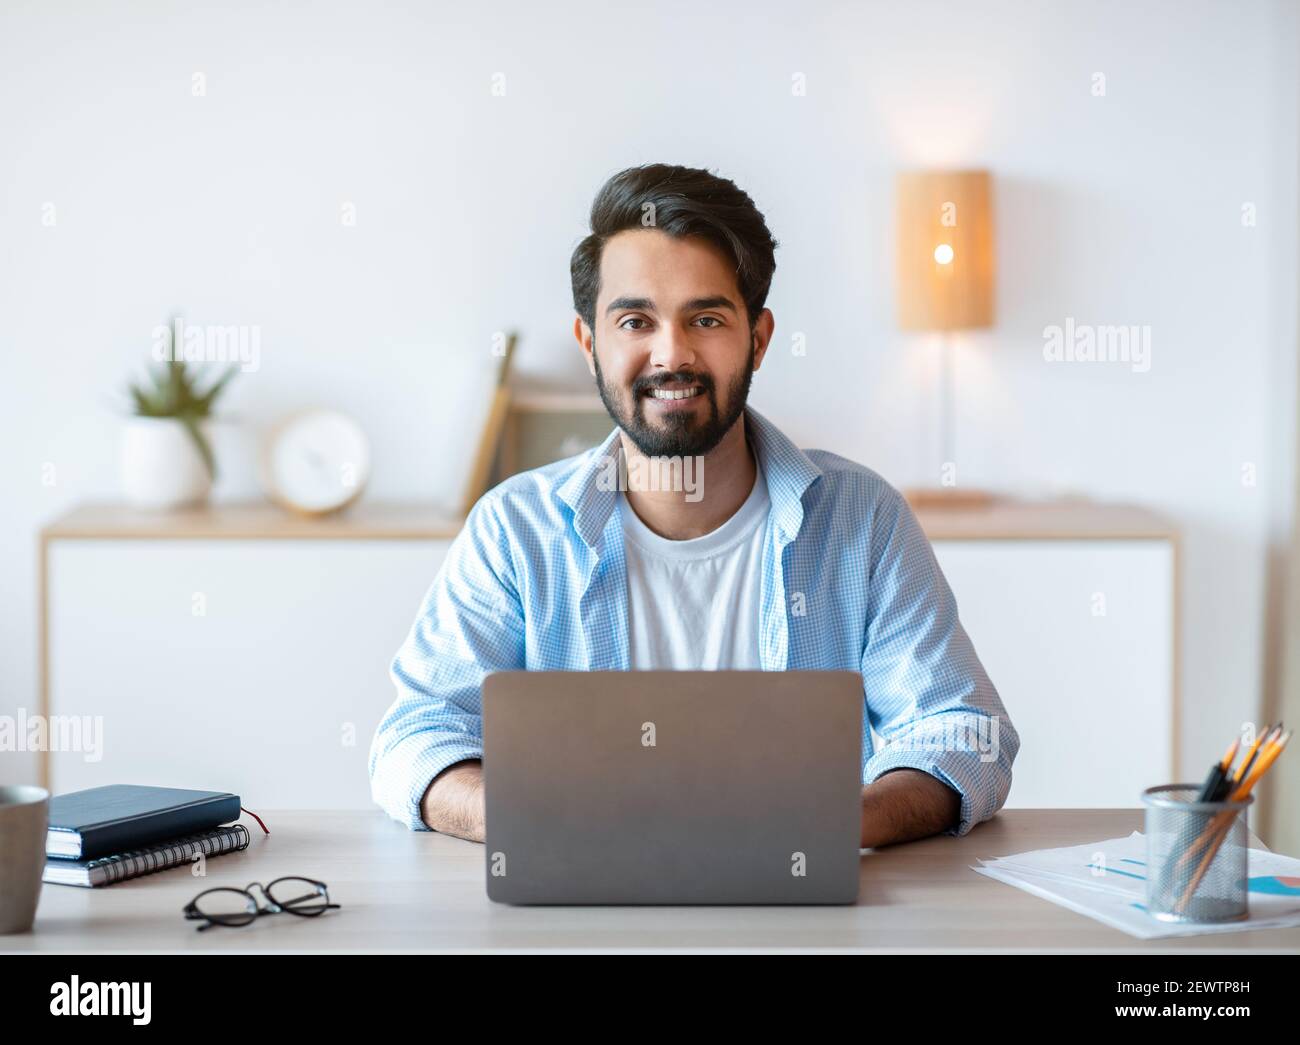 Freelance Lifestyle. Portrait Of Smiling Eastern Guy Sitting At Desk With Laptop Stock Photo